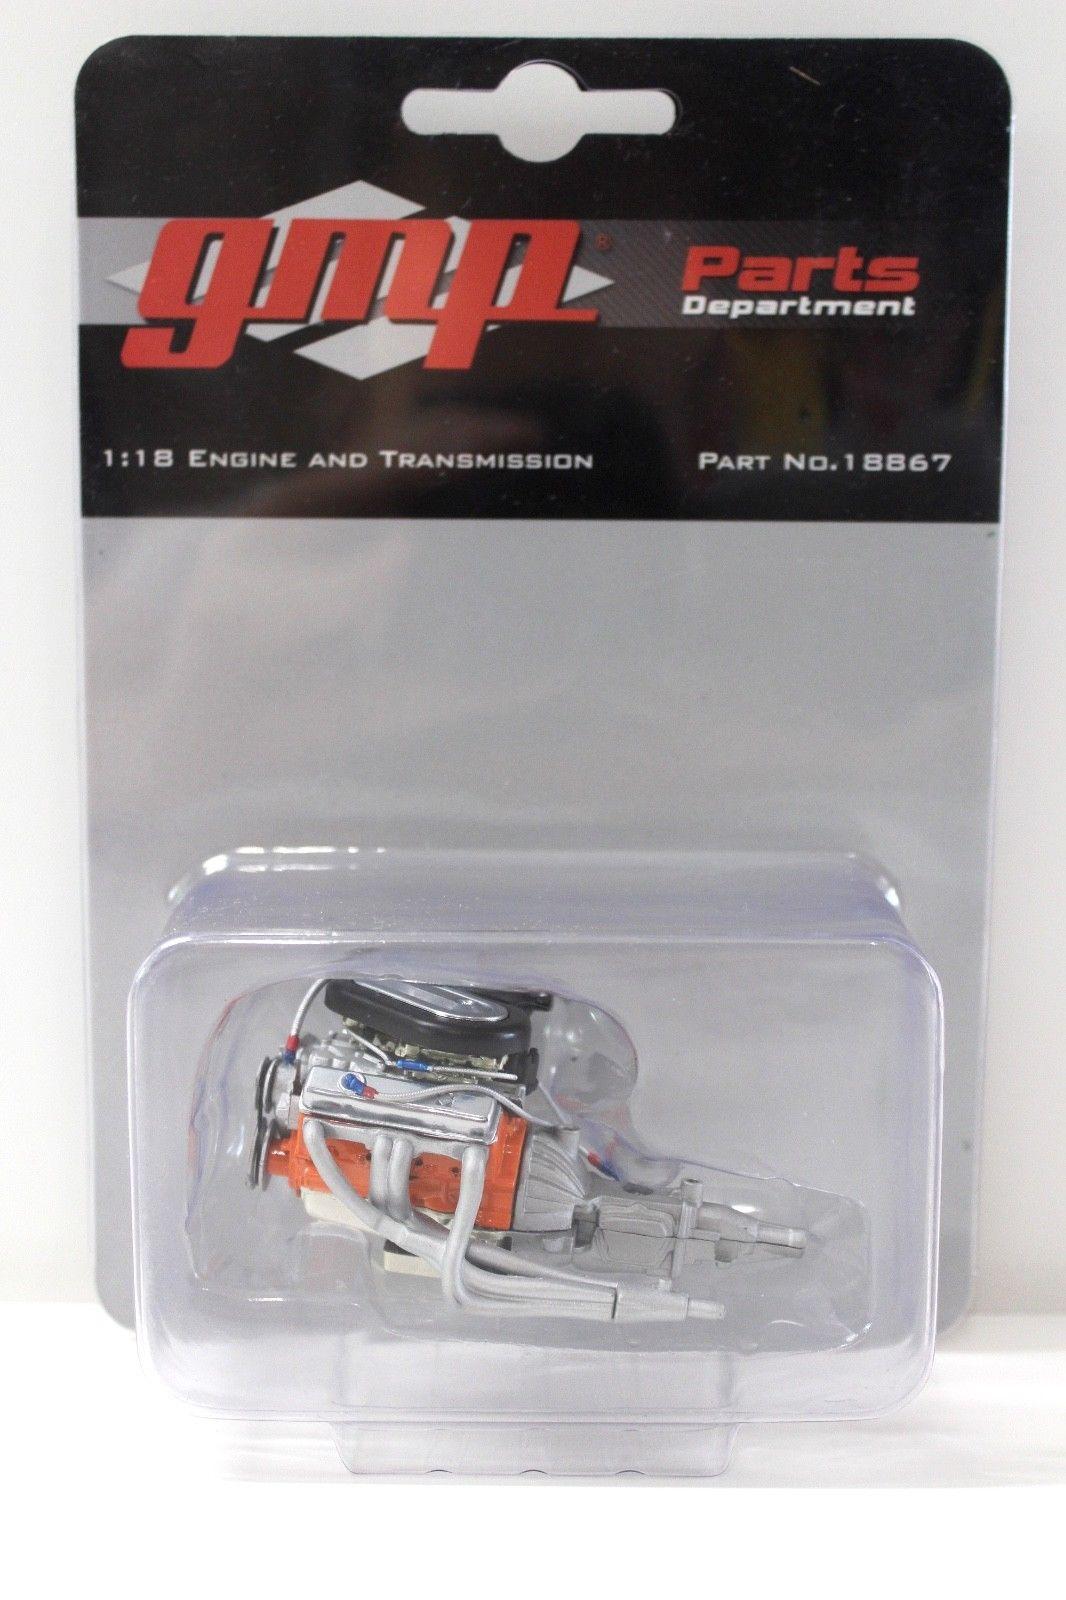 1:18 GMP Trans Am 302 Motor Engine and Transmission